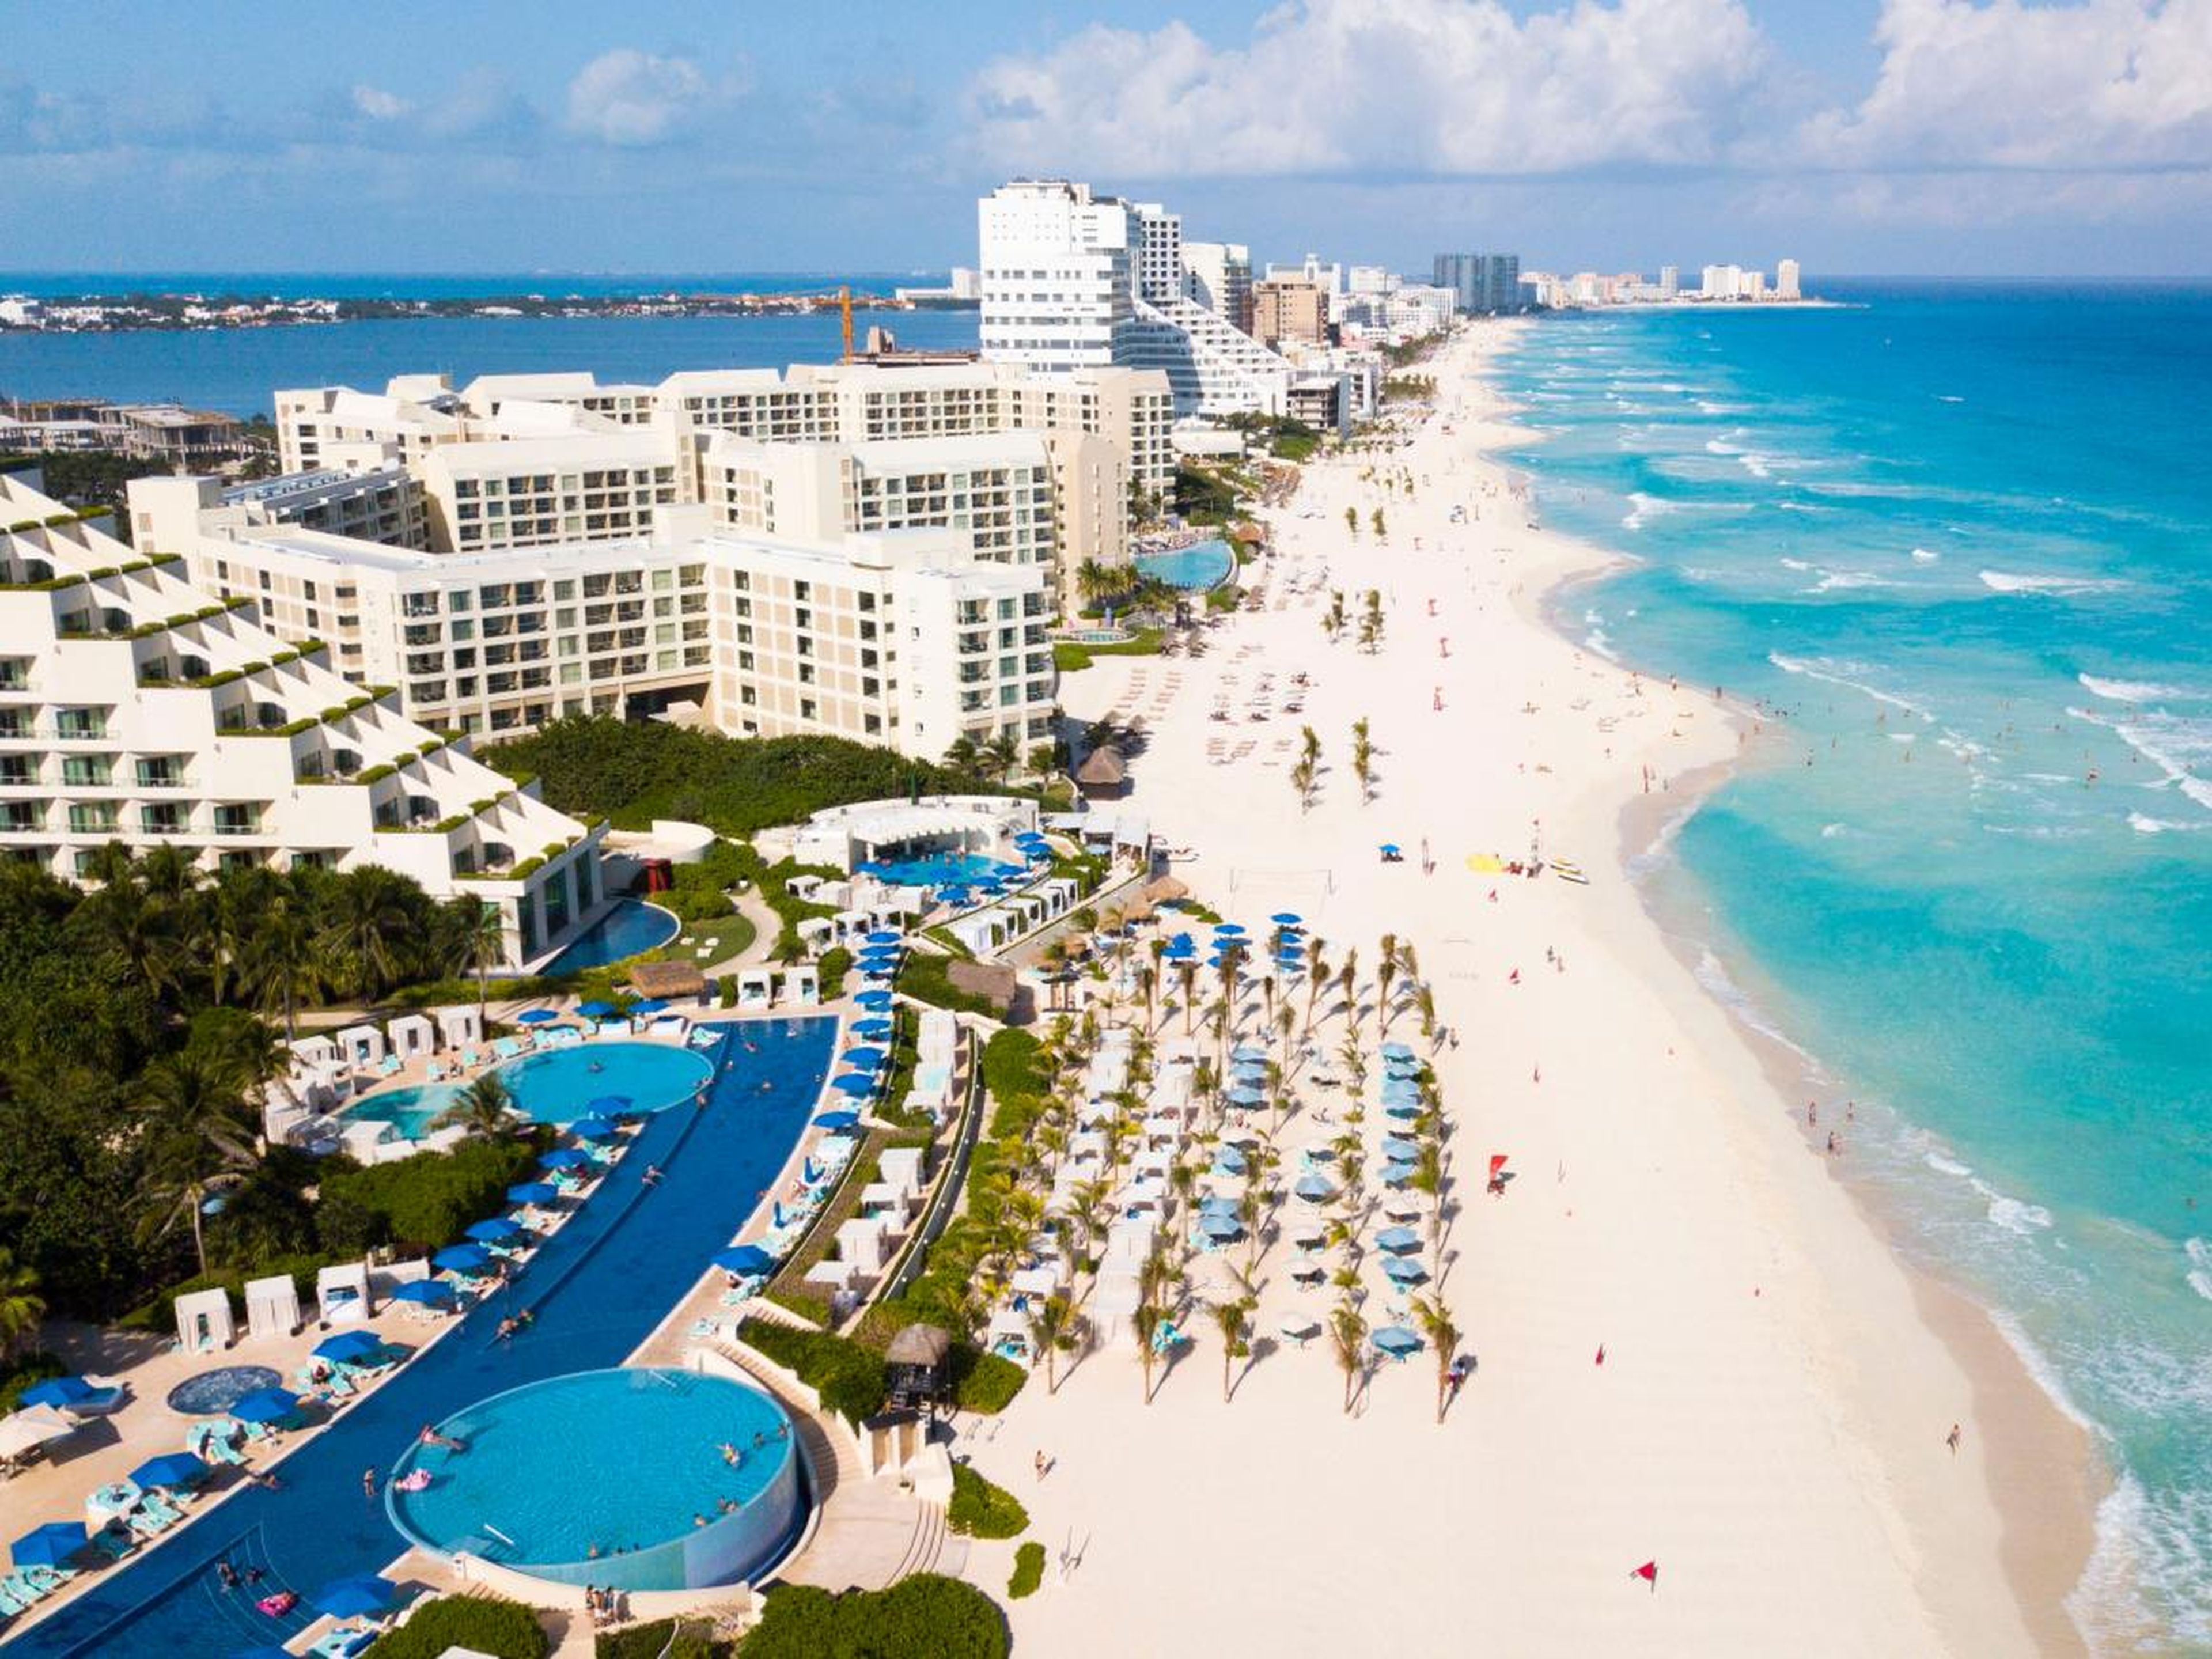 With its sandy beaches and abundance of all-inclusive resorts, Cancún, Mexico, has the trappings of an idyllic beach vacation.